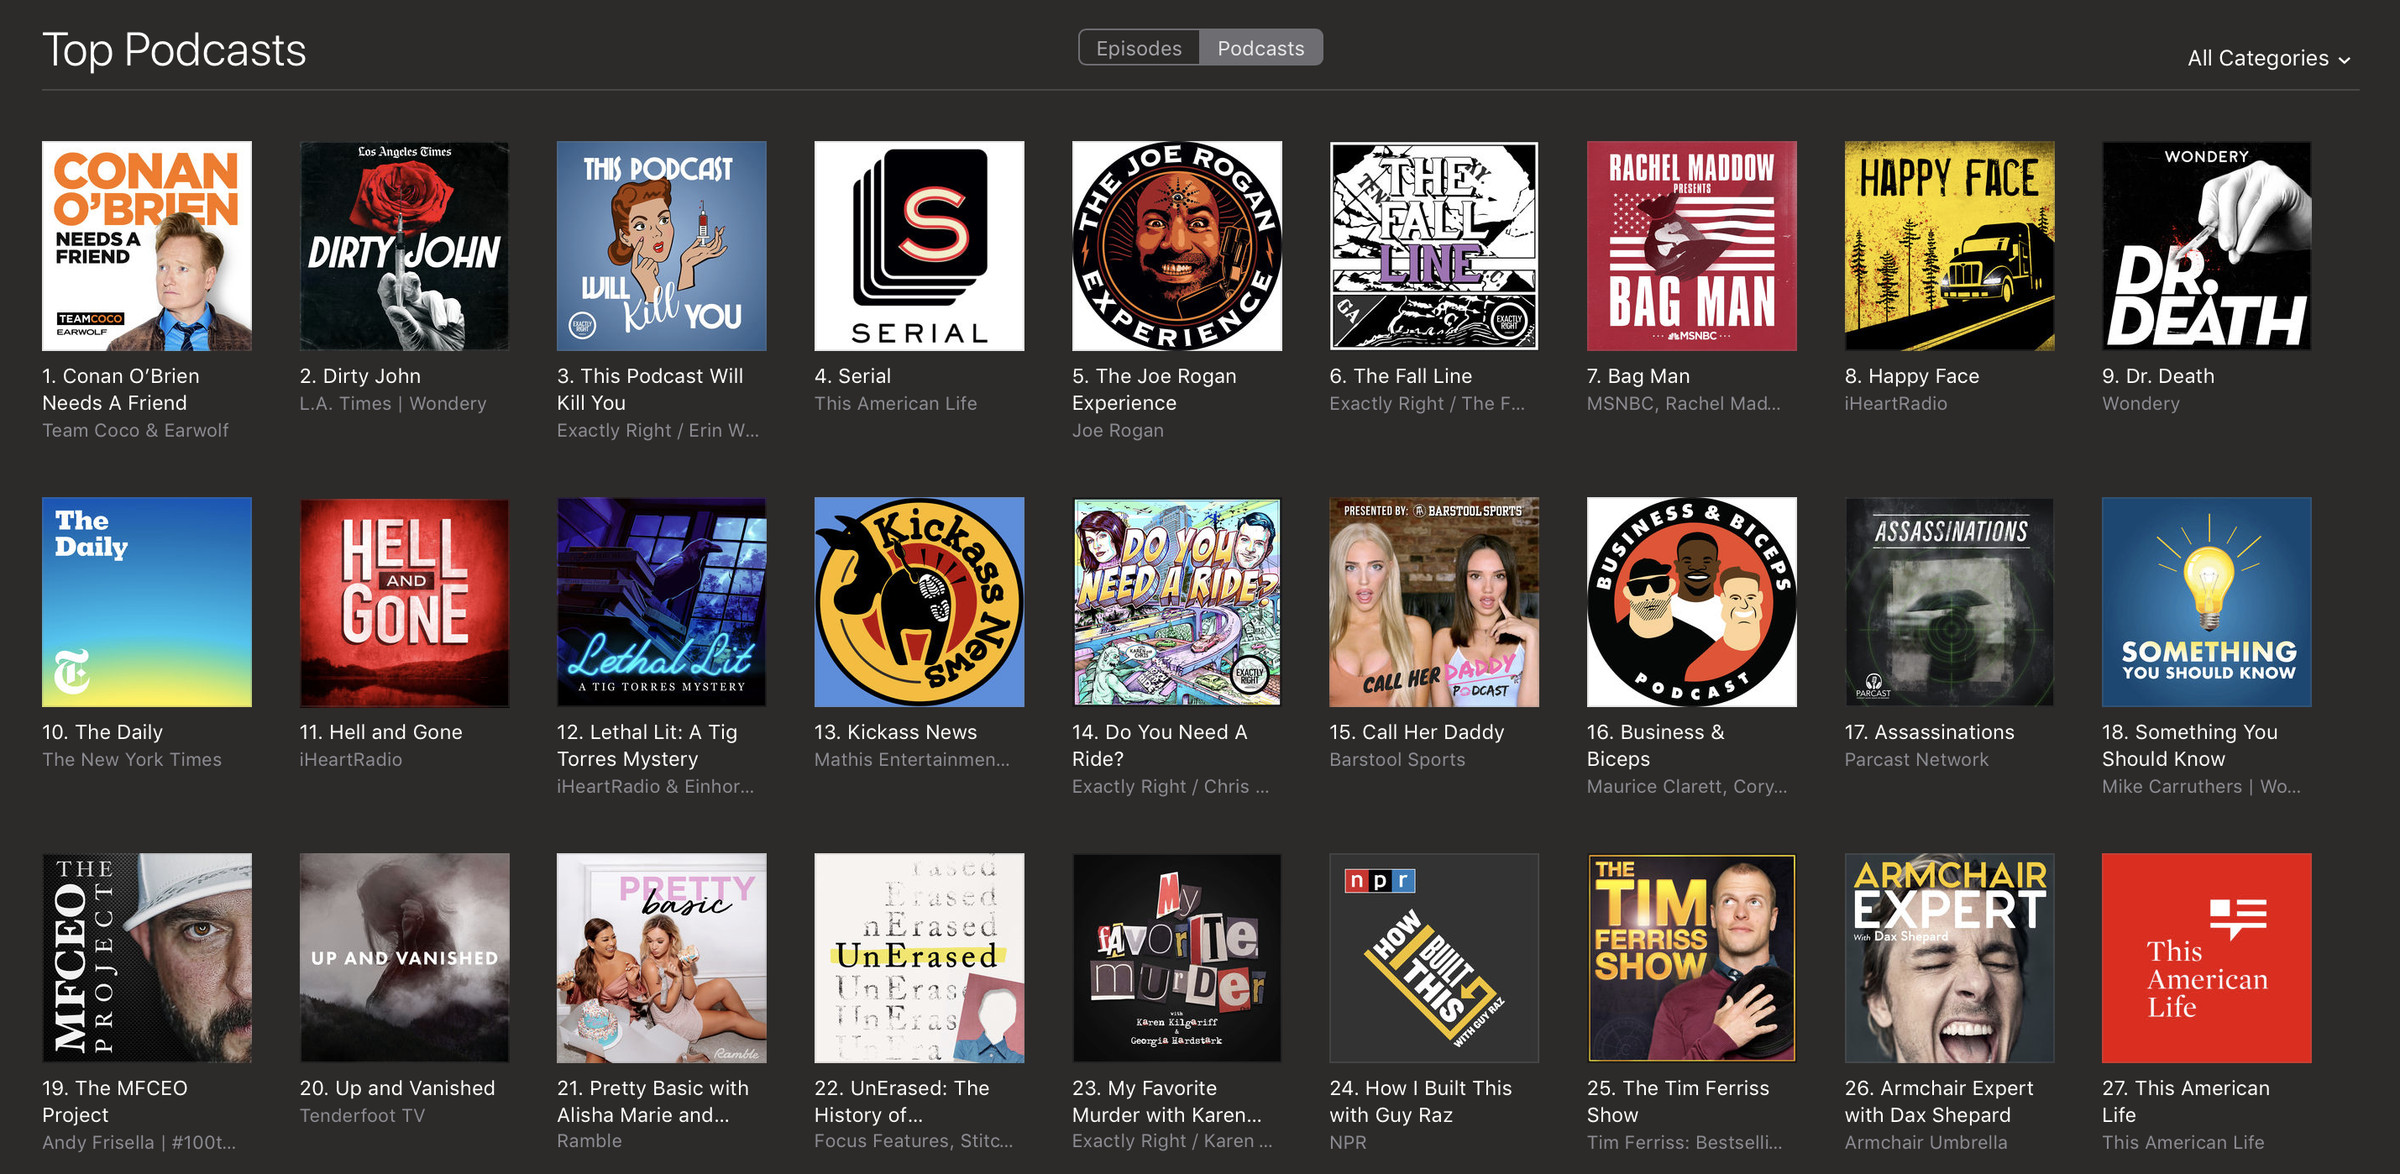 The top Apple Podcast charts.